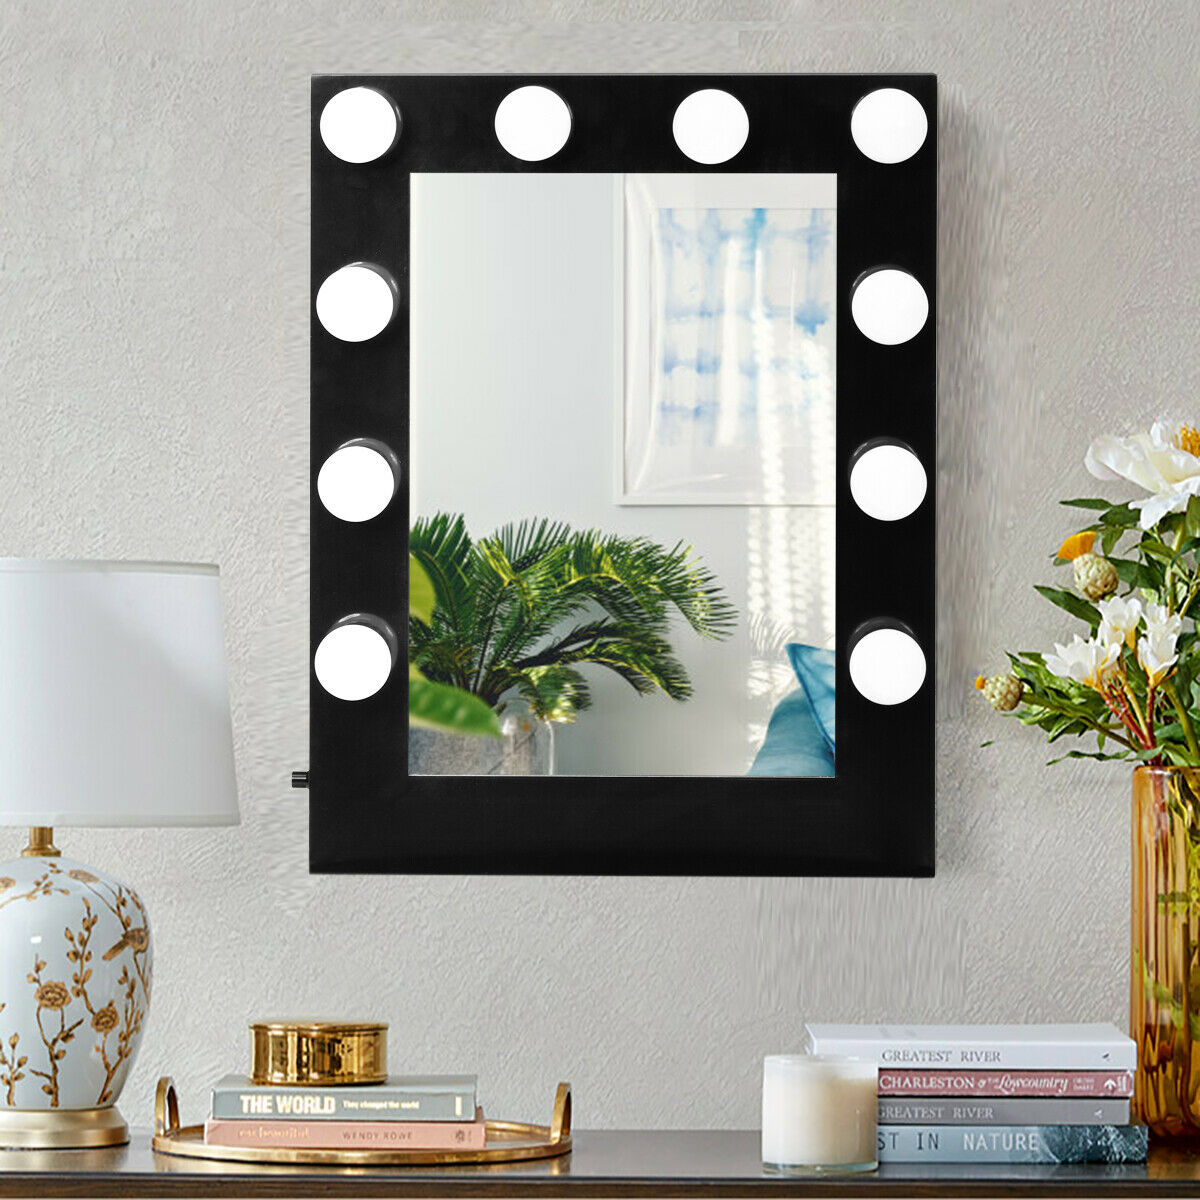 Wall Mounted Vanity Mirror Hollywood Makeup Dimmer Light Black